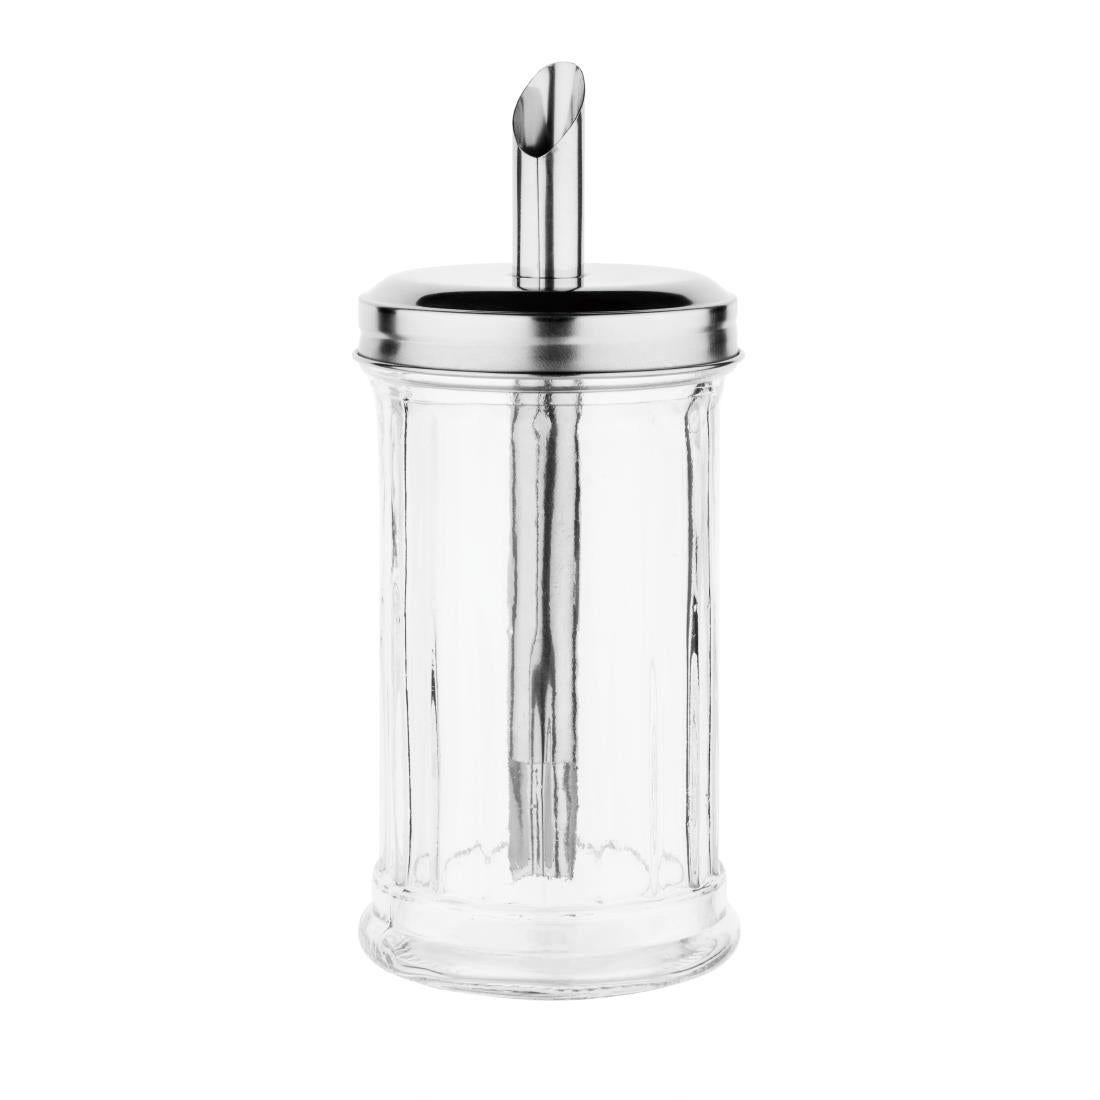 Olympia Sugar Pourer With 19mm Single Spout